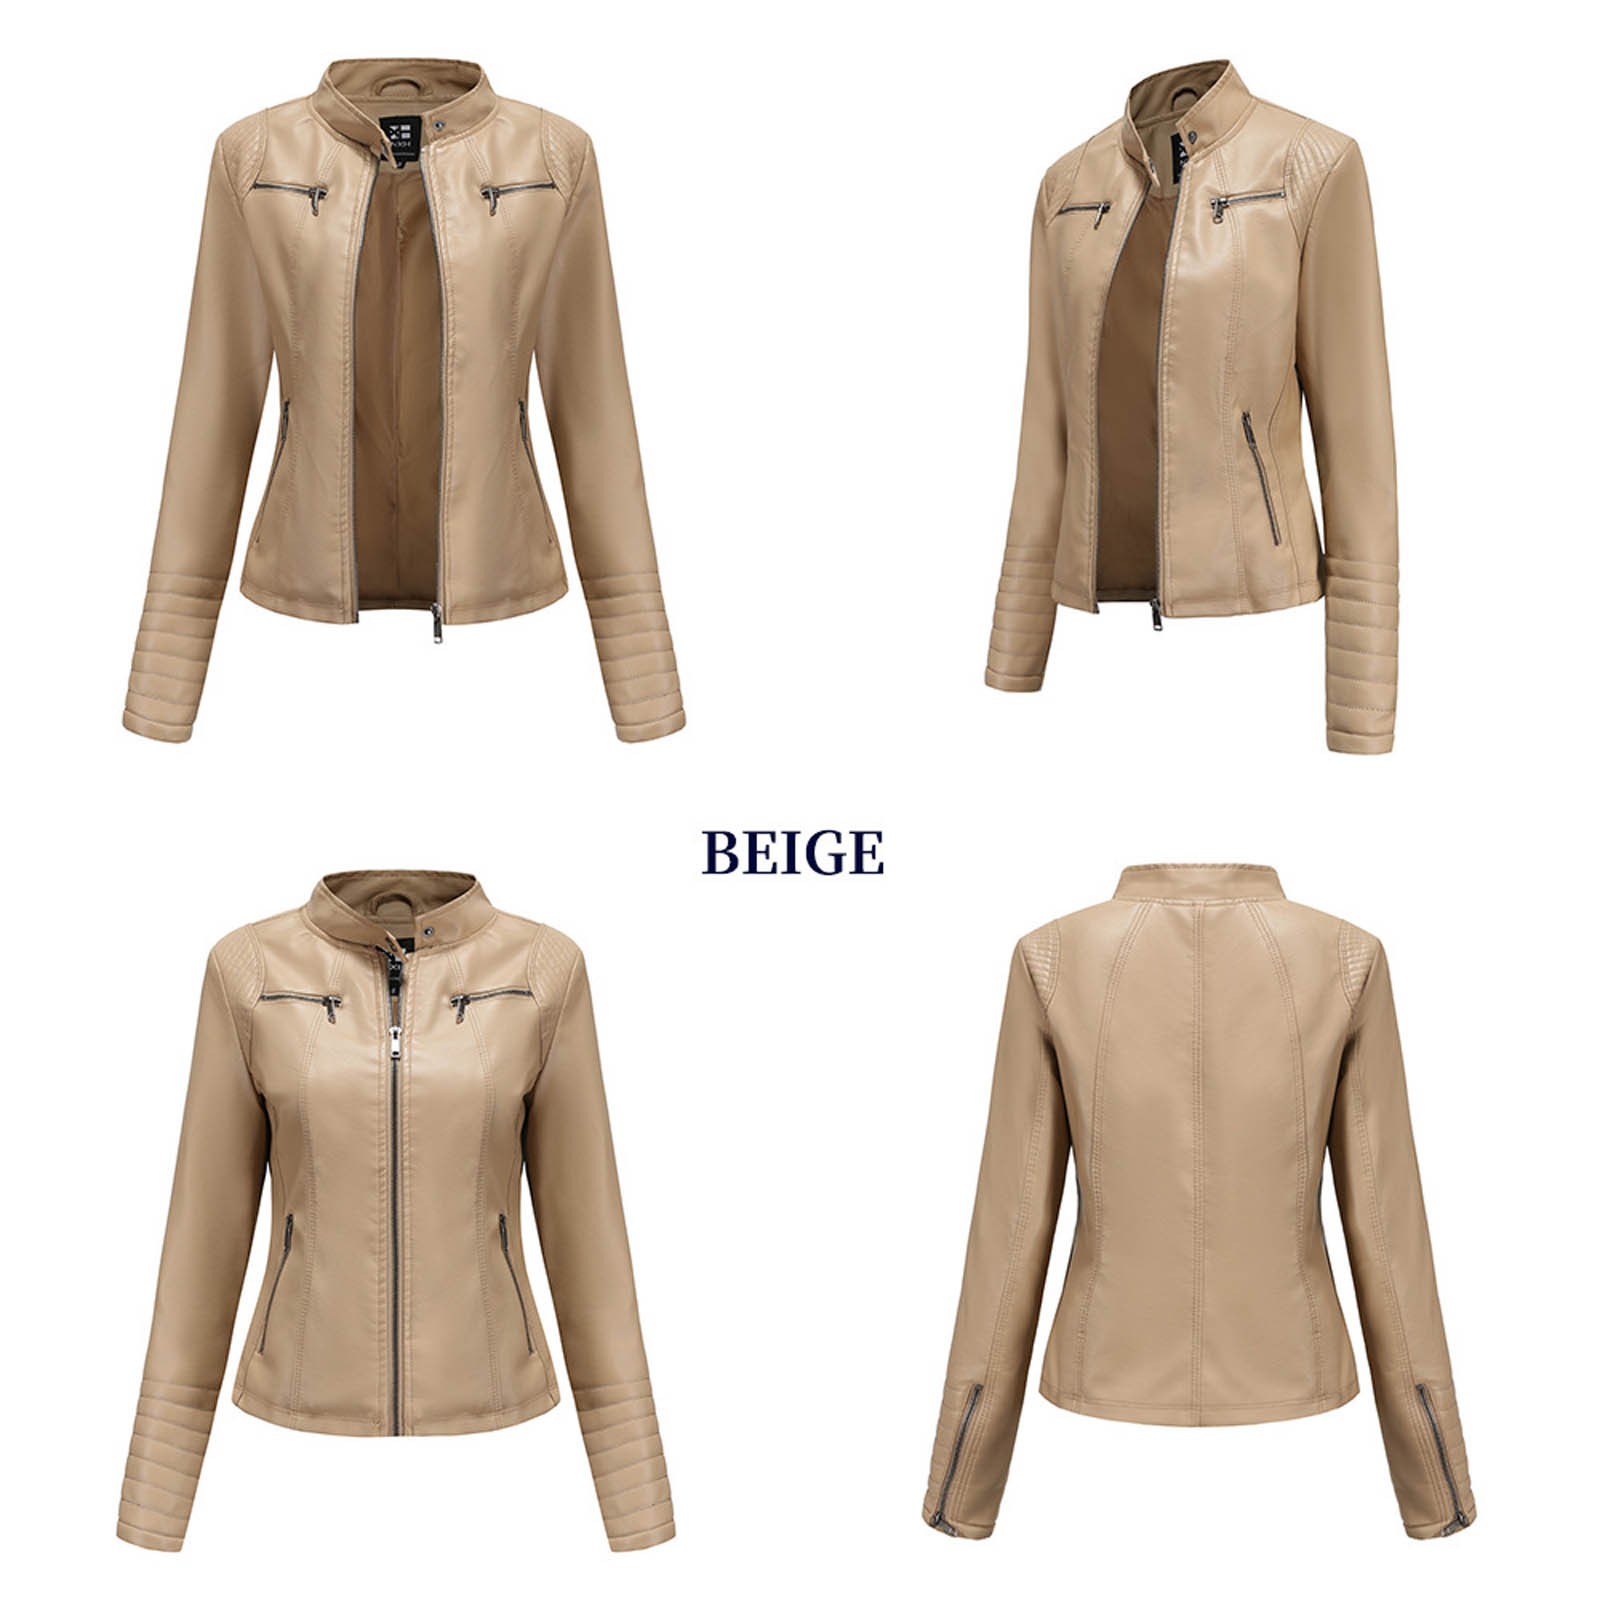 Tejiojio Coats Clearance Women's Slim-Fit Leather Stand-Up Collar Zipper Motorcycle Suit Thin Coat Jacket - image 5 of 7